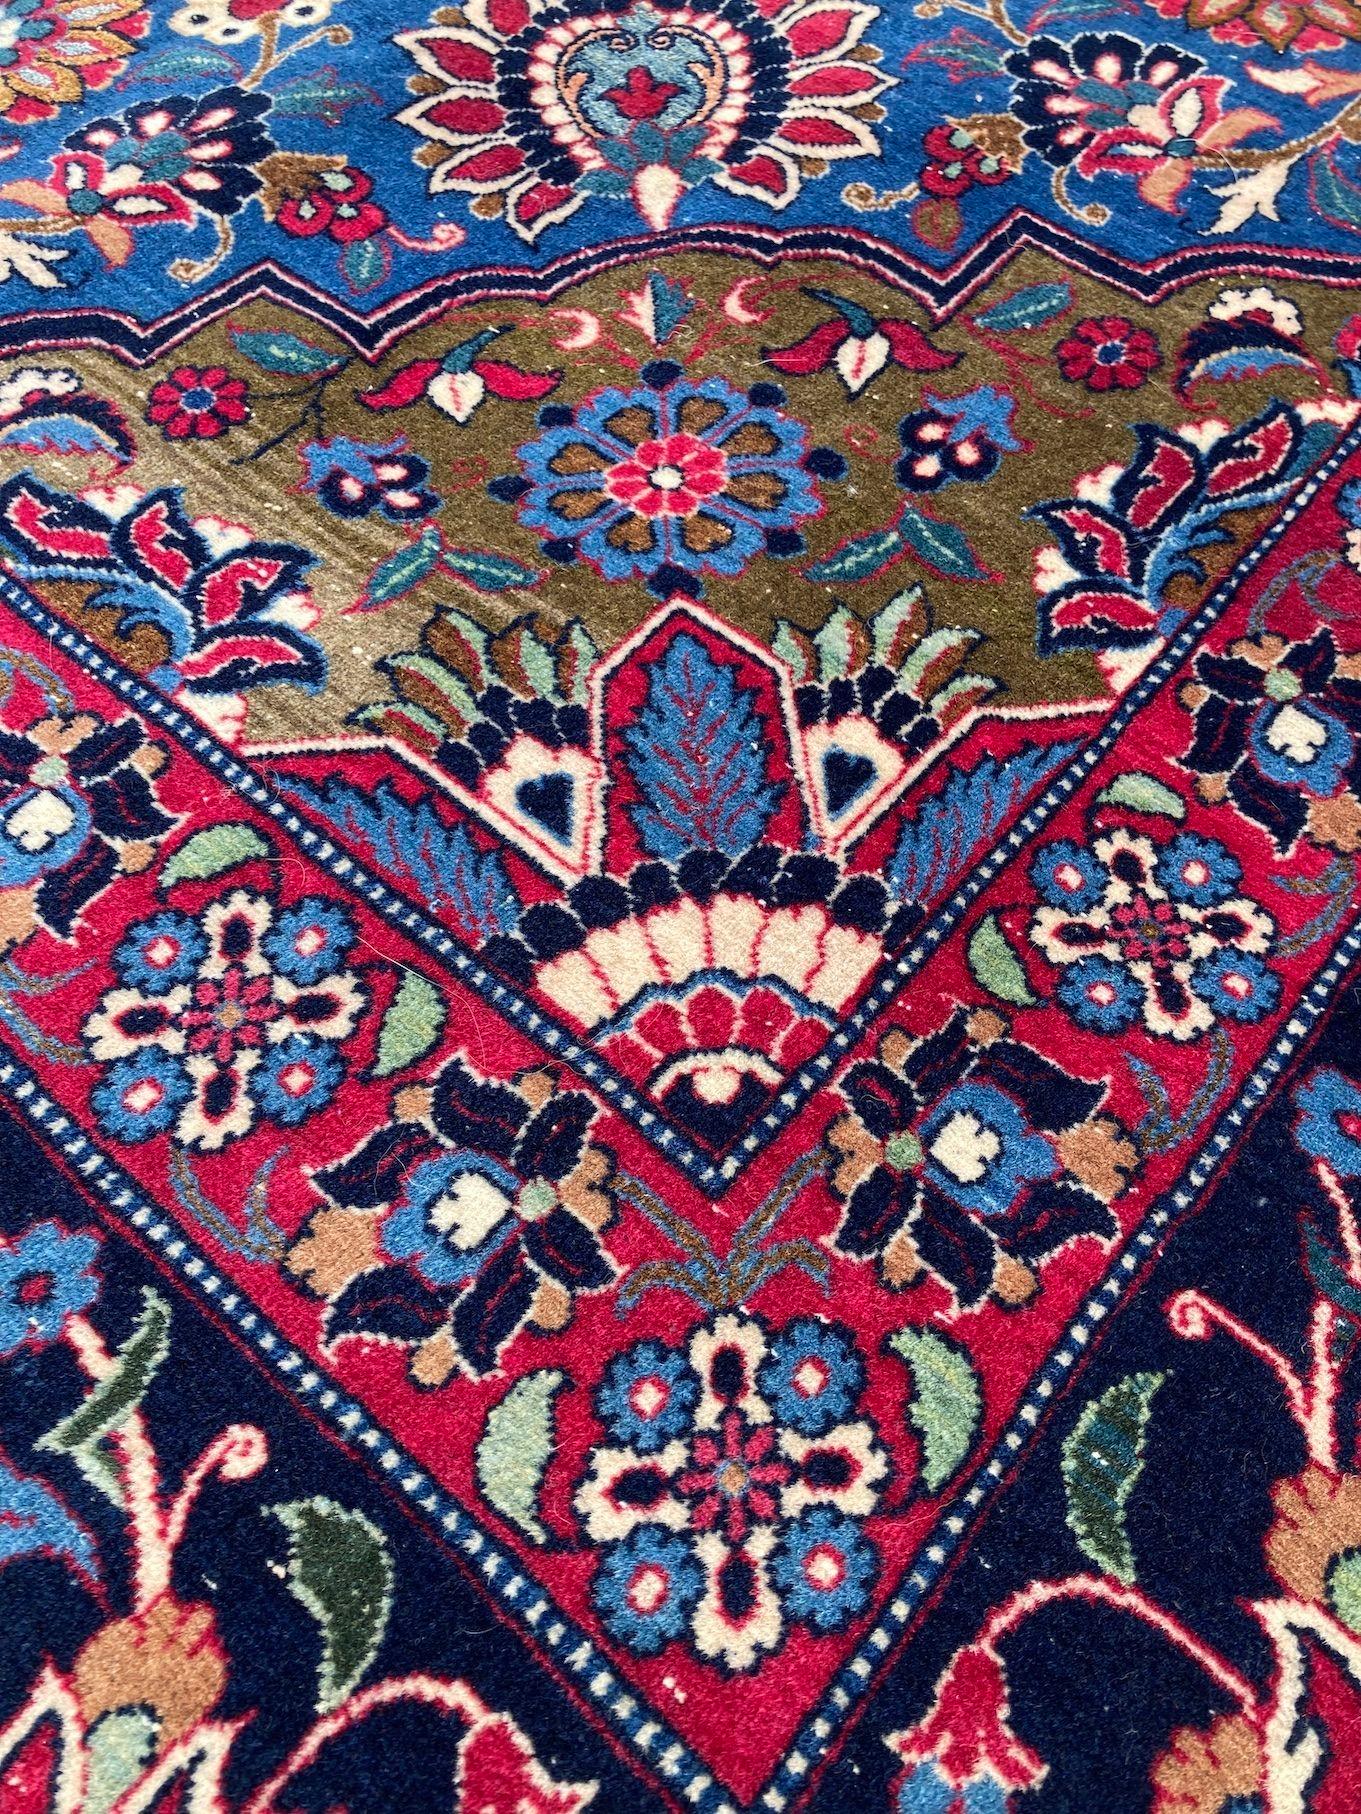 Antique Wool & Silk Isfahan Carpet 3.43m x 2.33m For Sale 6